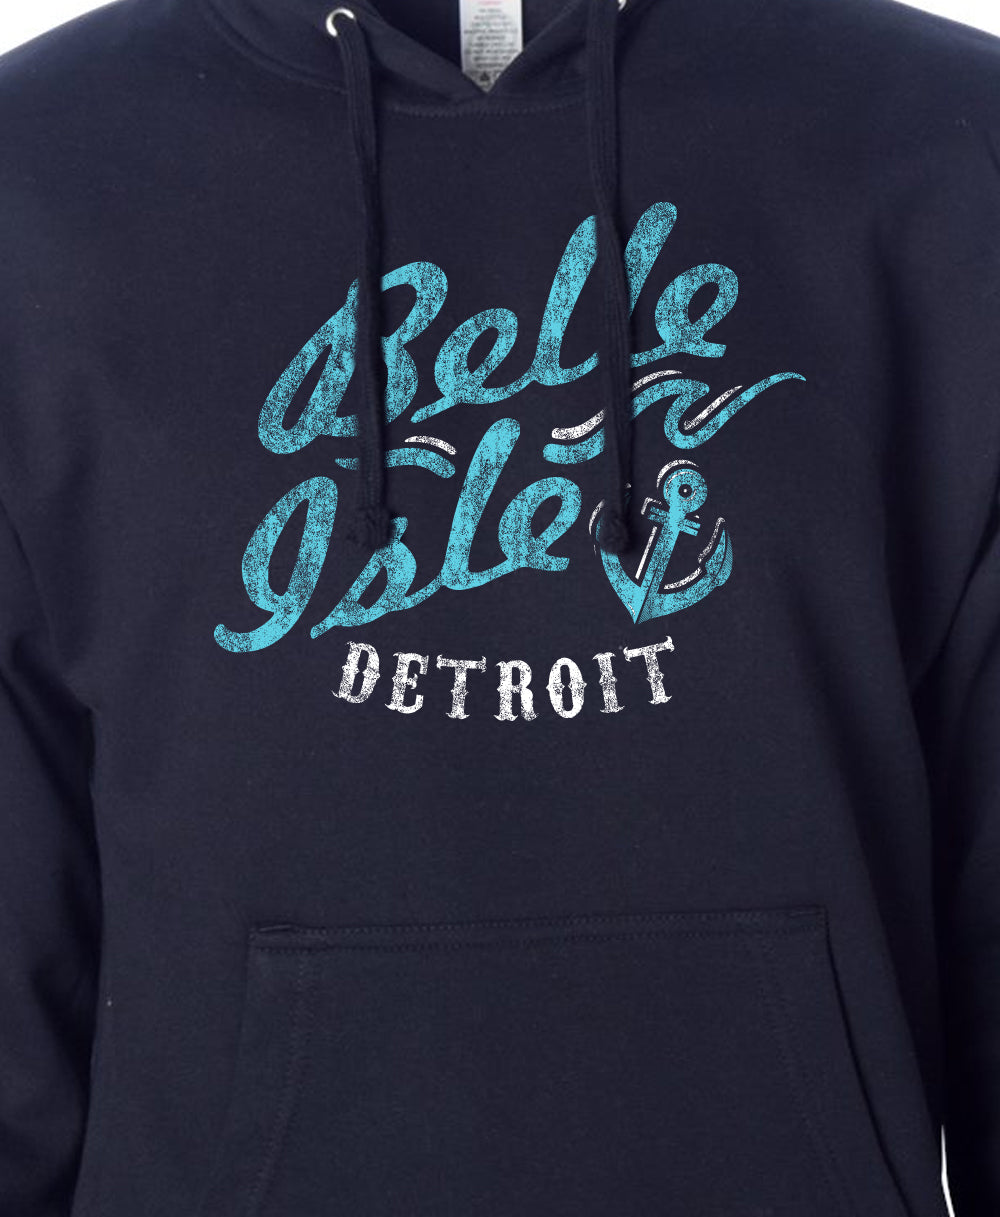 Belle Isle Pullover